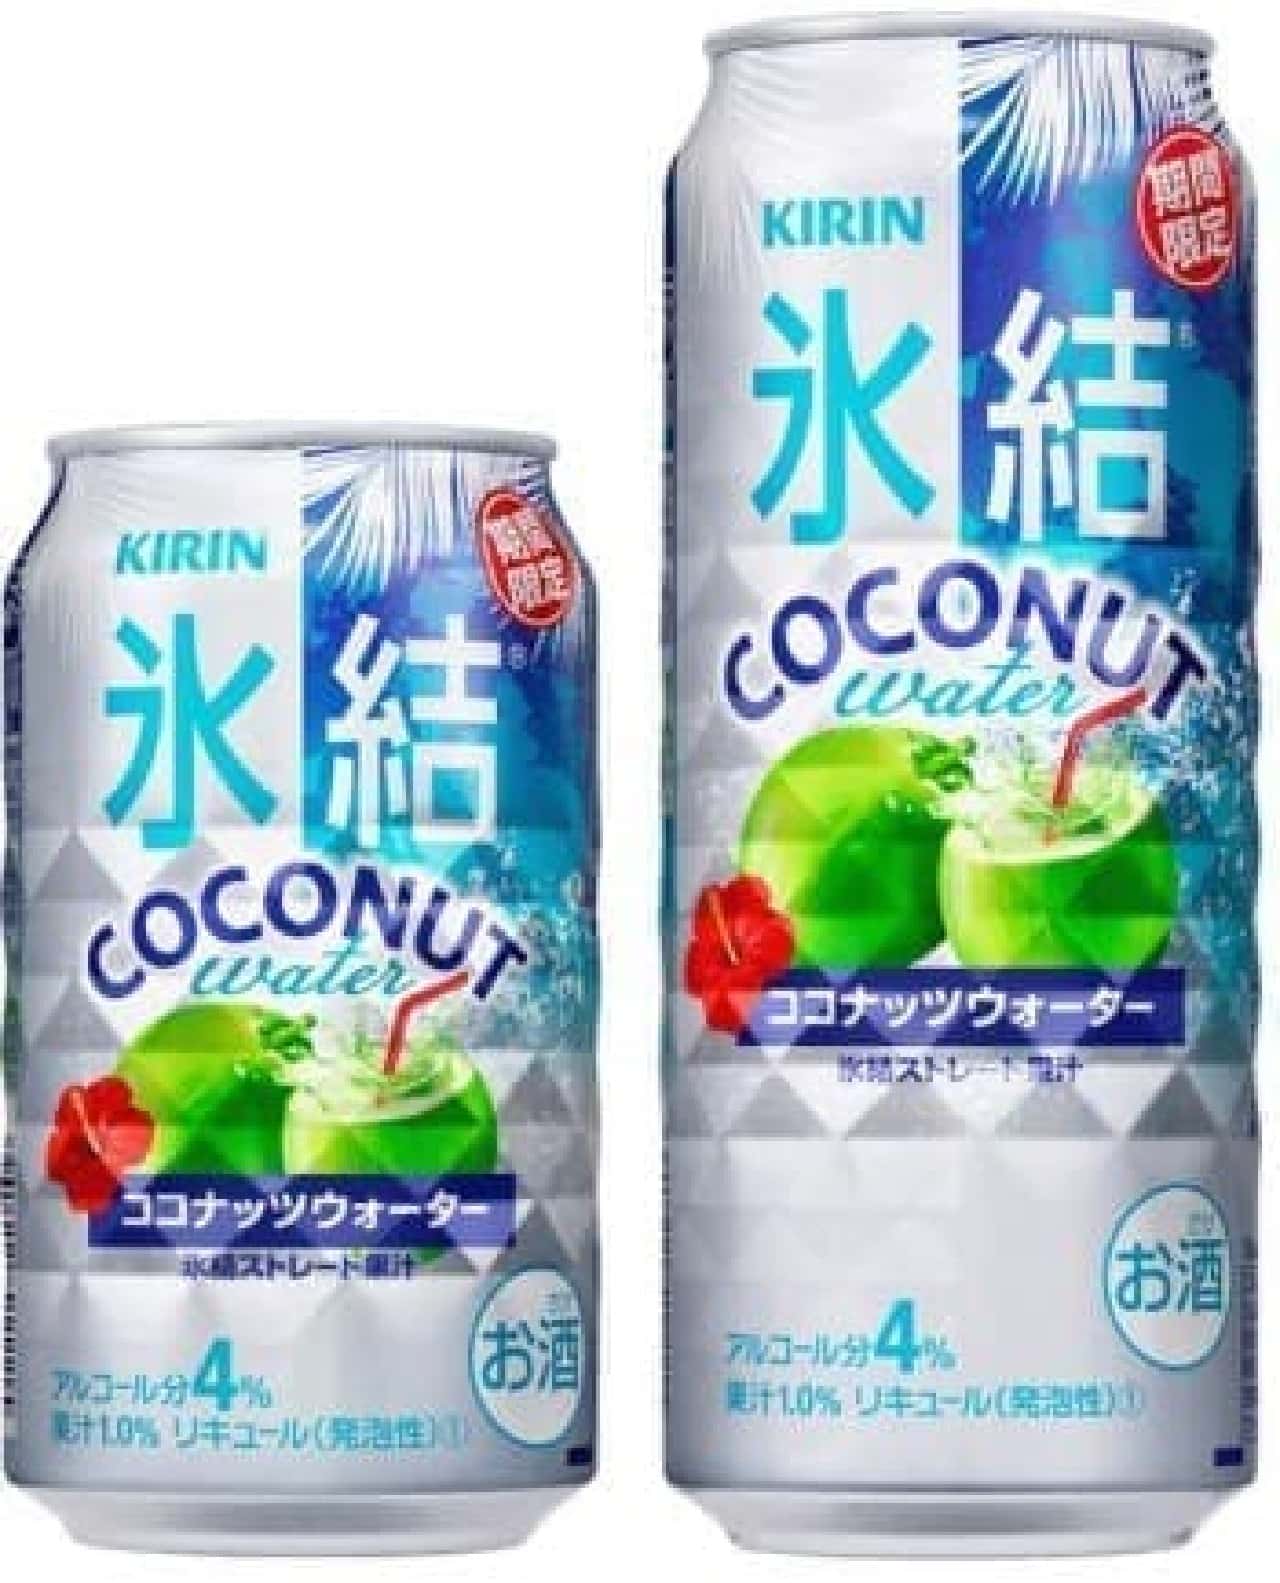 "Coconut water", which is attracting attention from overseas celebrities, freezes!